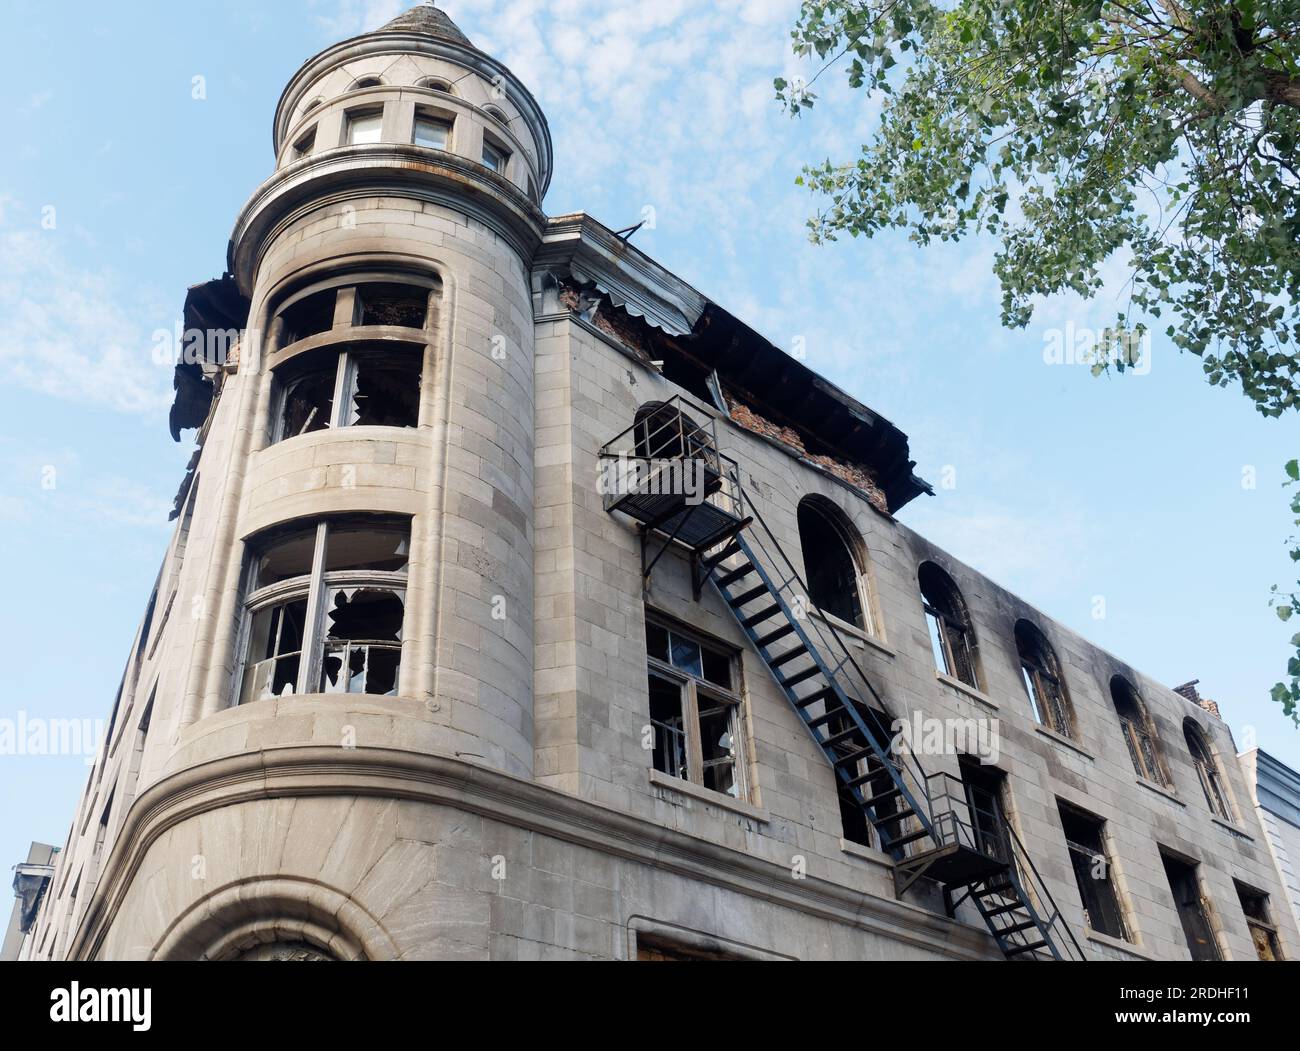 Facade of burned out heritage building in old Montreal. Stock Photo